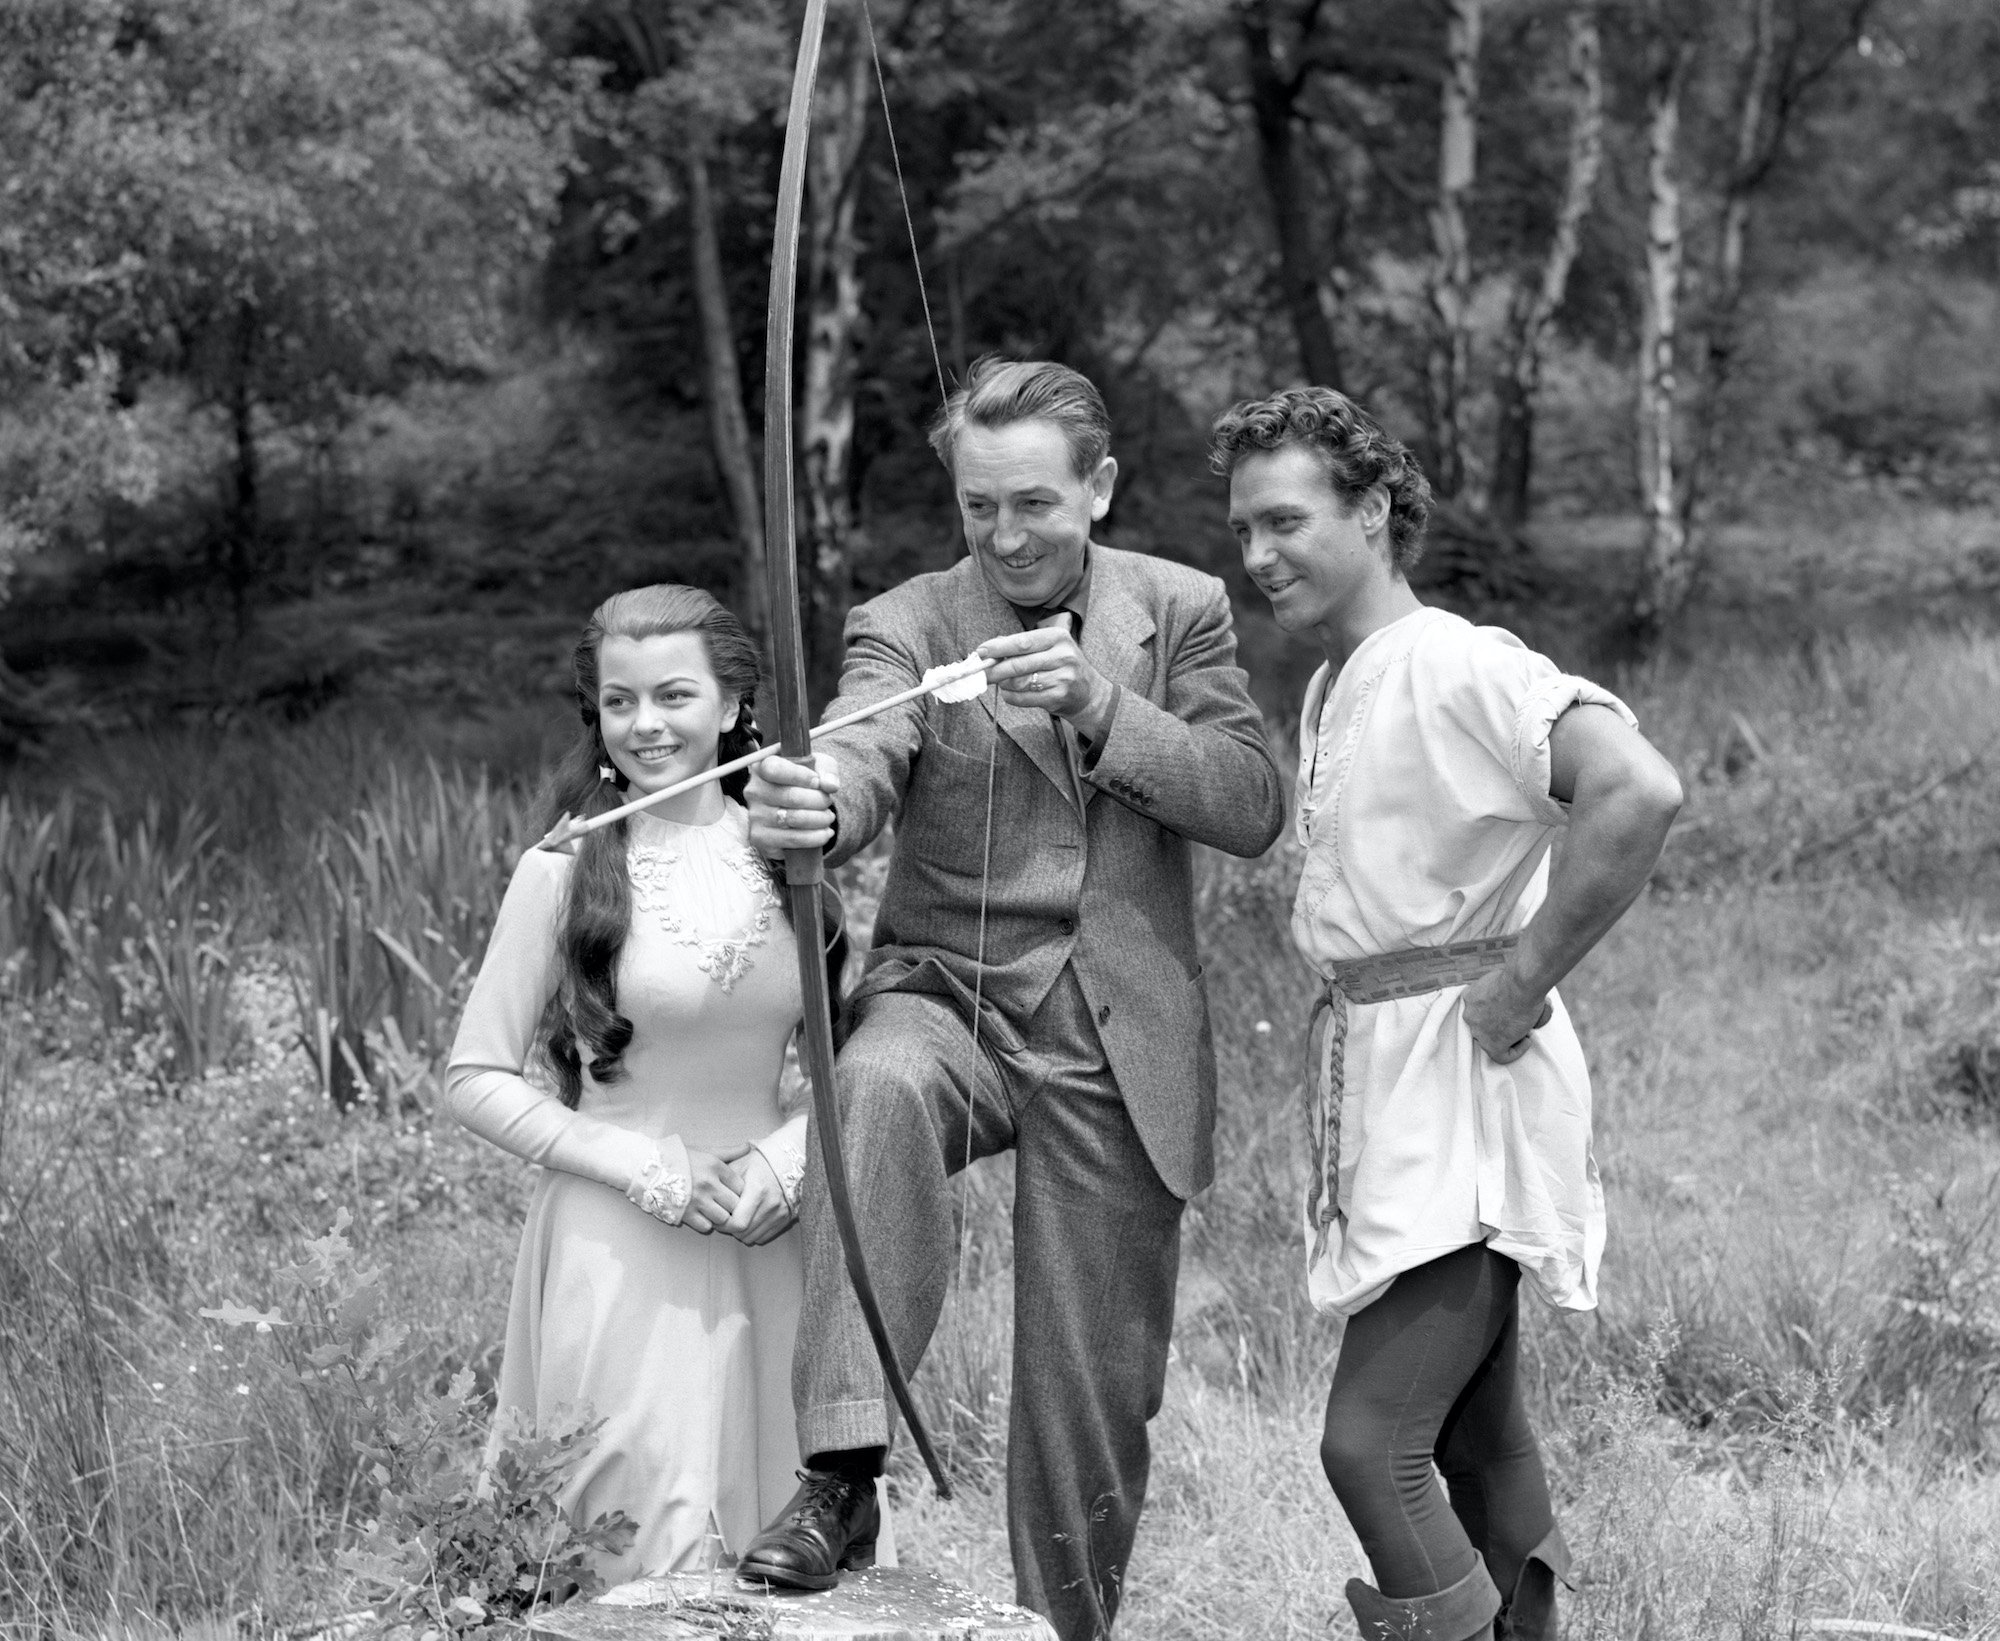 Walt Disney with 'Robin Hood' actor Richard Todd and Joan Rice, in black and white